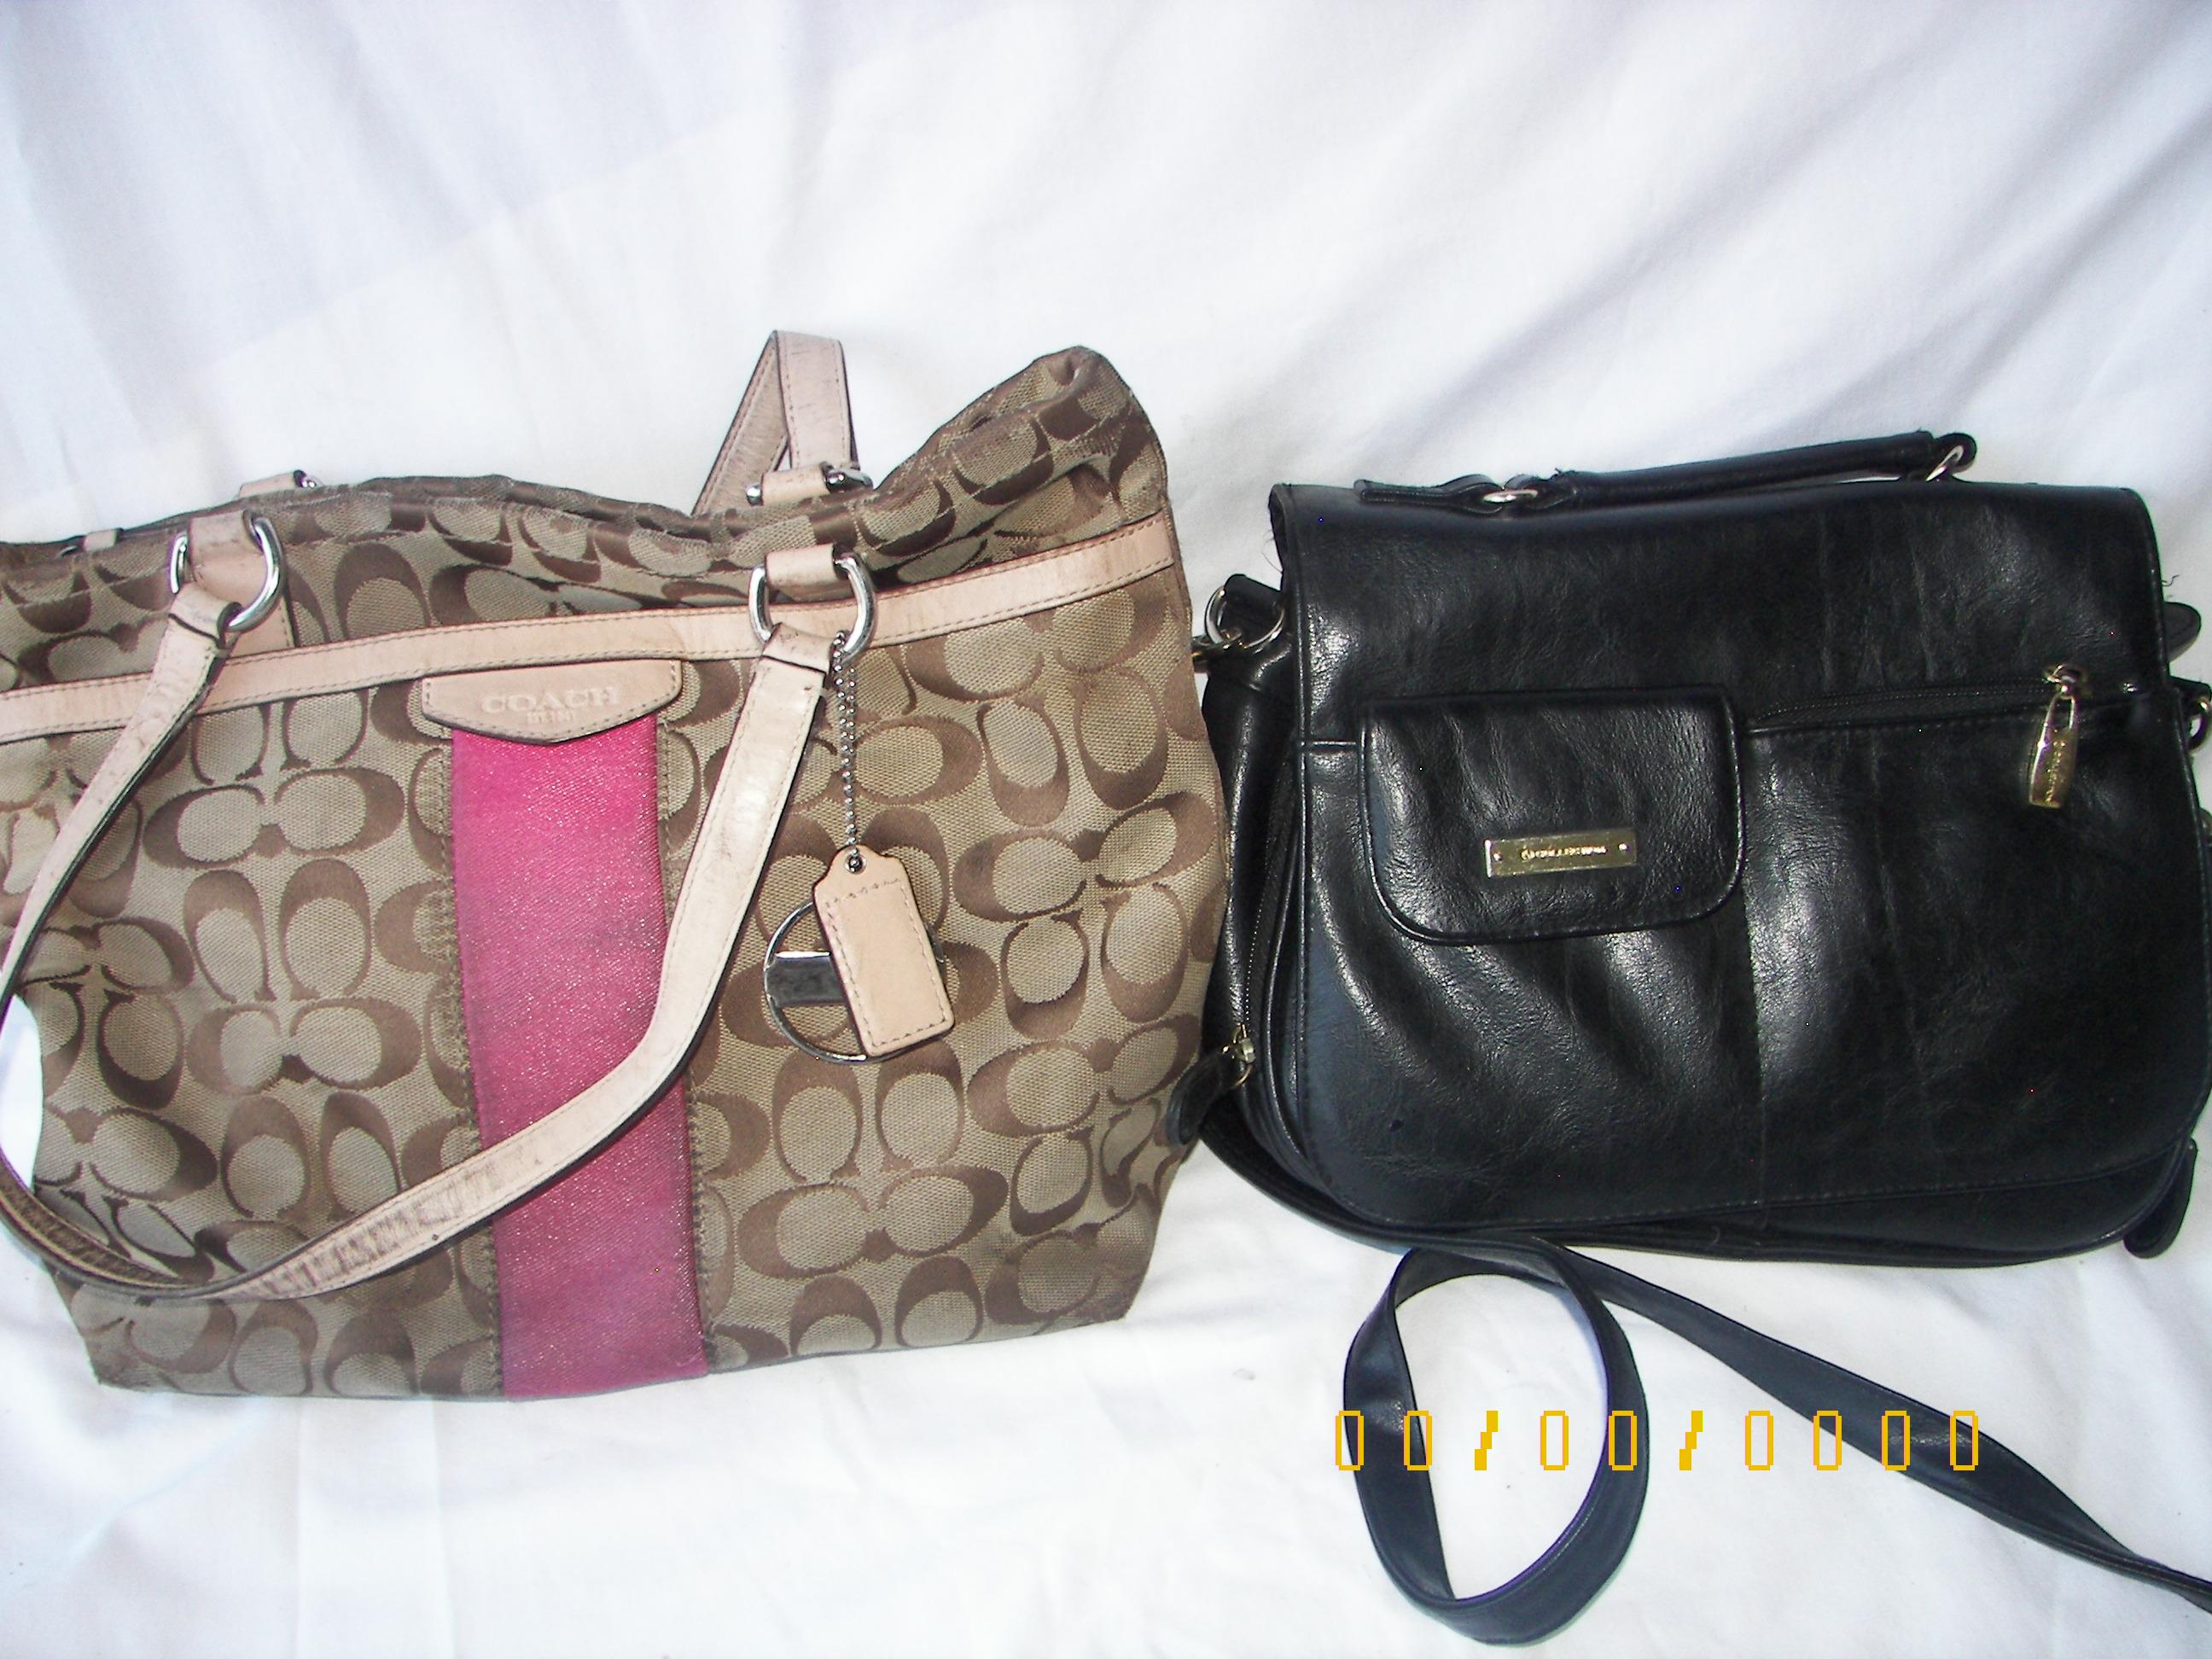 WOMENS PURSES- COACH AND 1 OTHER